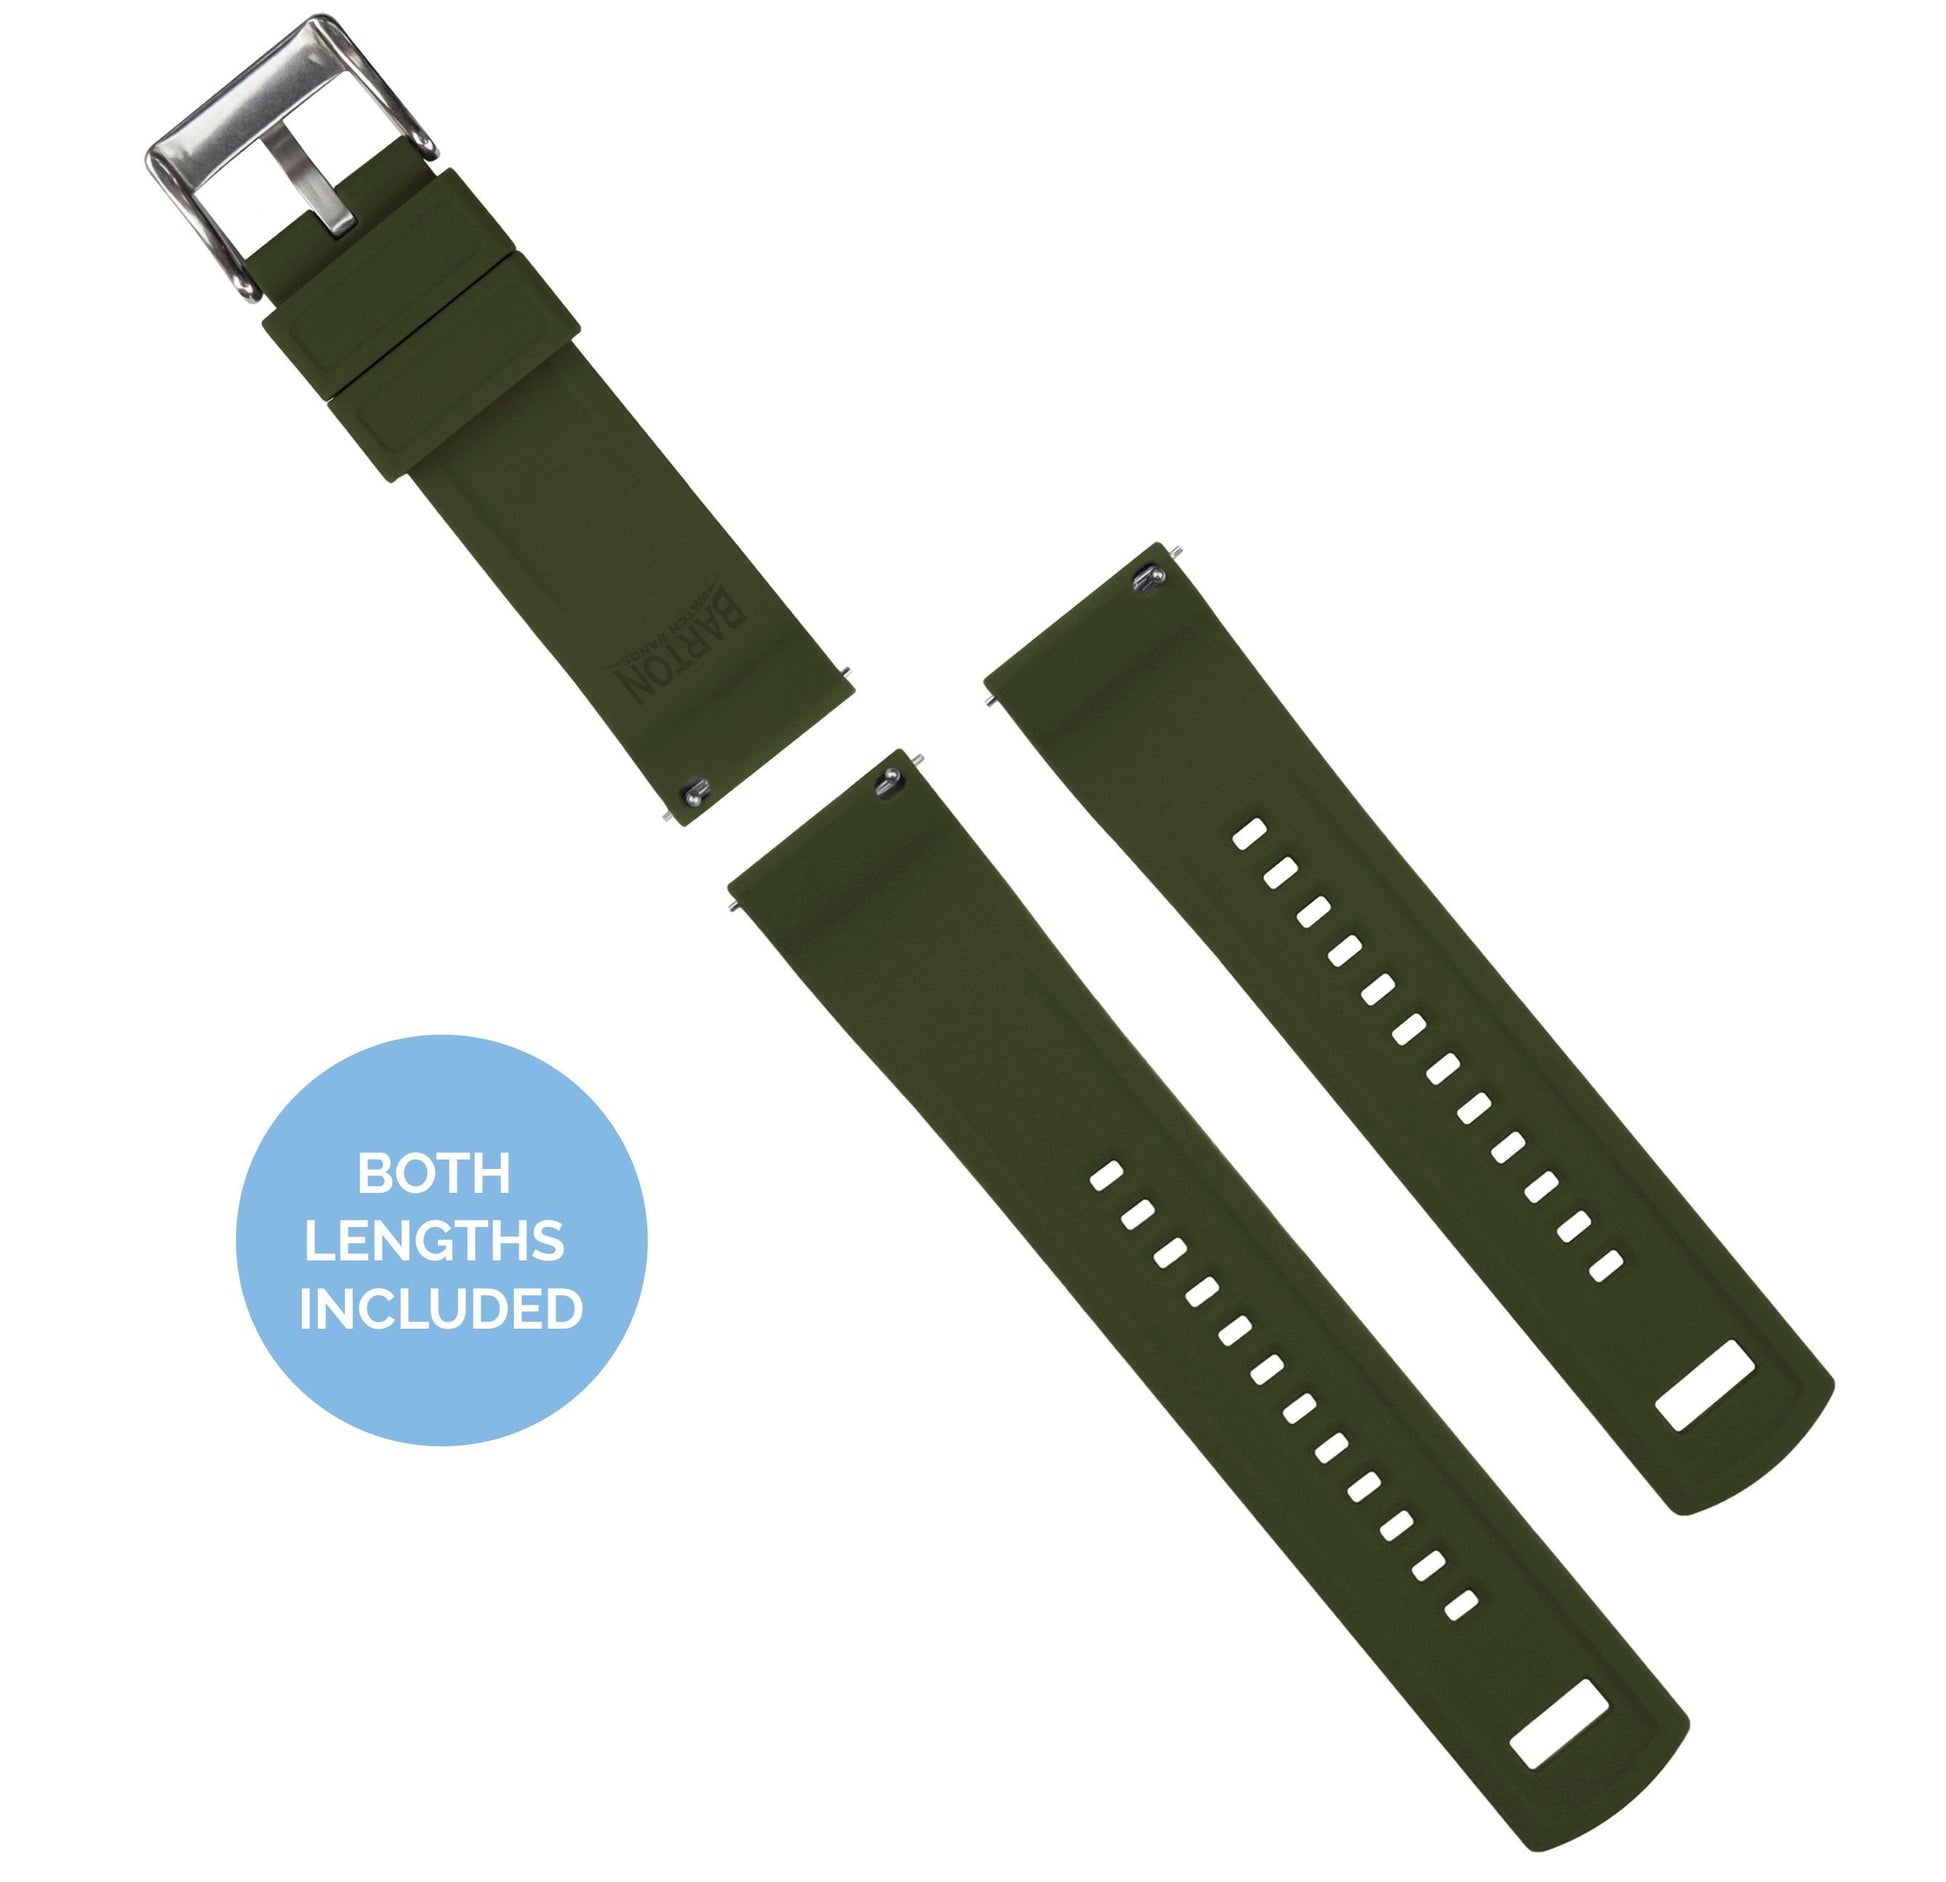 MOONSWATCH Bip | Elite Silicone | Black Top / Army Green Bottom - Barton Watch Bands